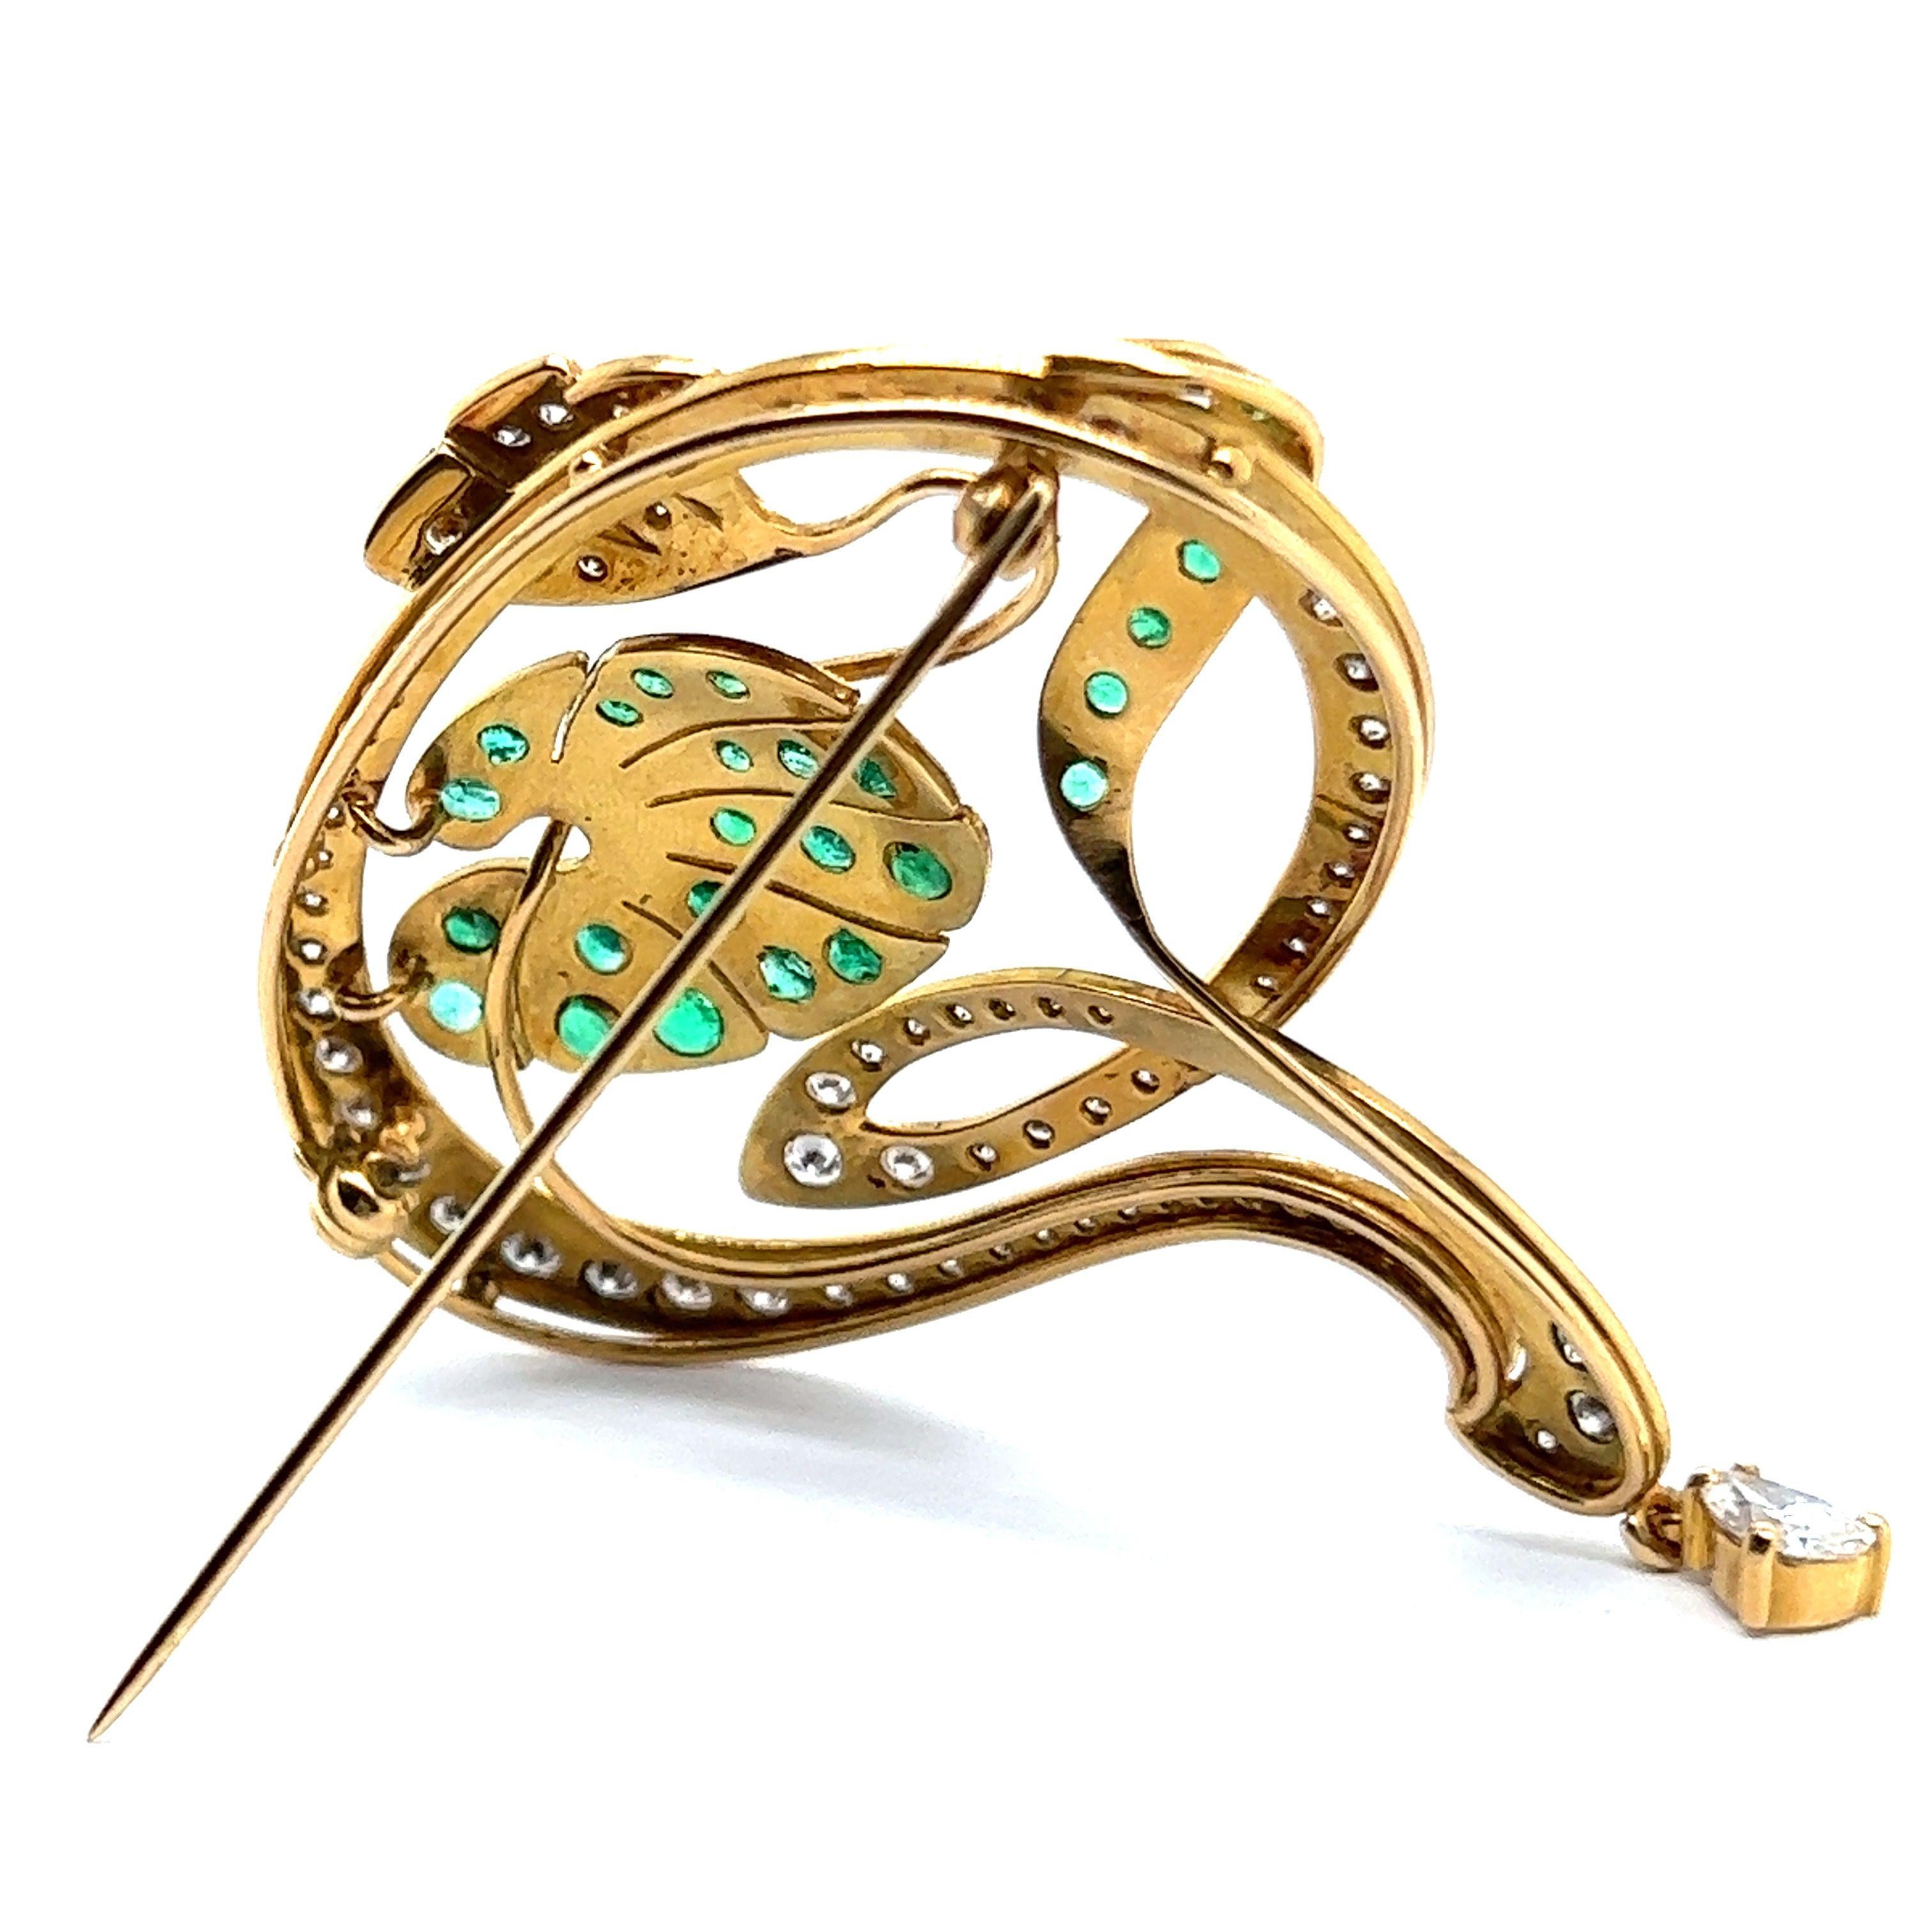 This elegant  broch is inspired by the timeless Art Nouveau style. The main features of this style was a distinctive appearance with soft, curved shapes and lines that often depicted natural designs of flora and fauna. 

Crafted in rich yellow gold